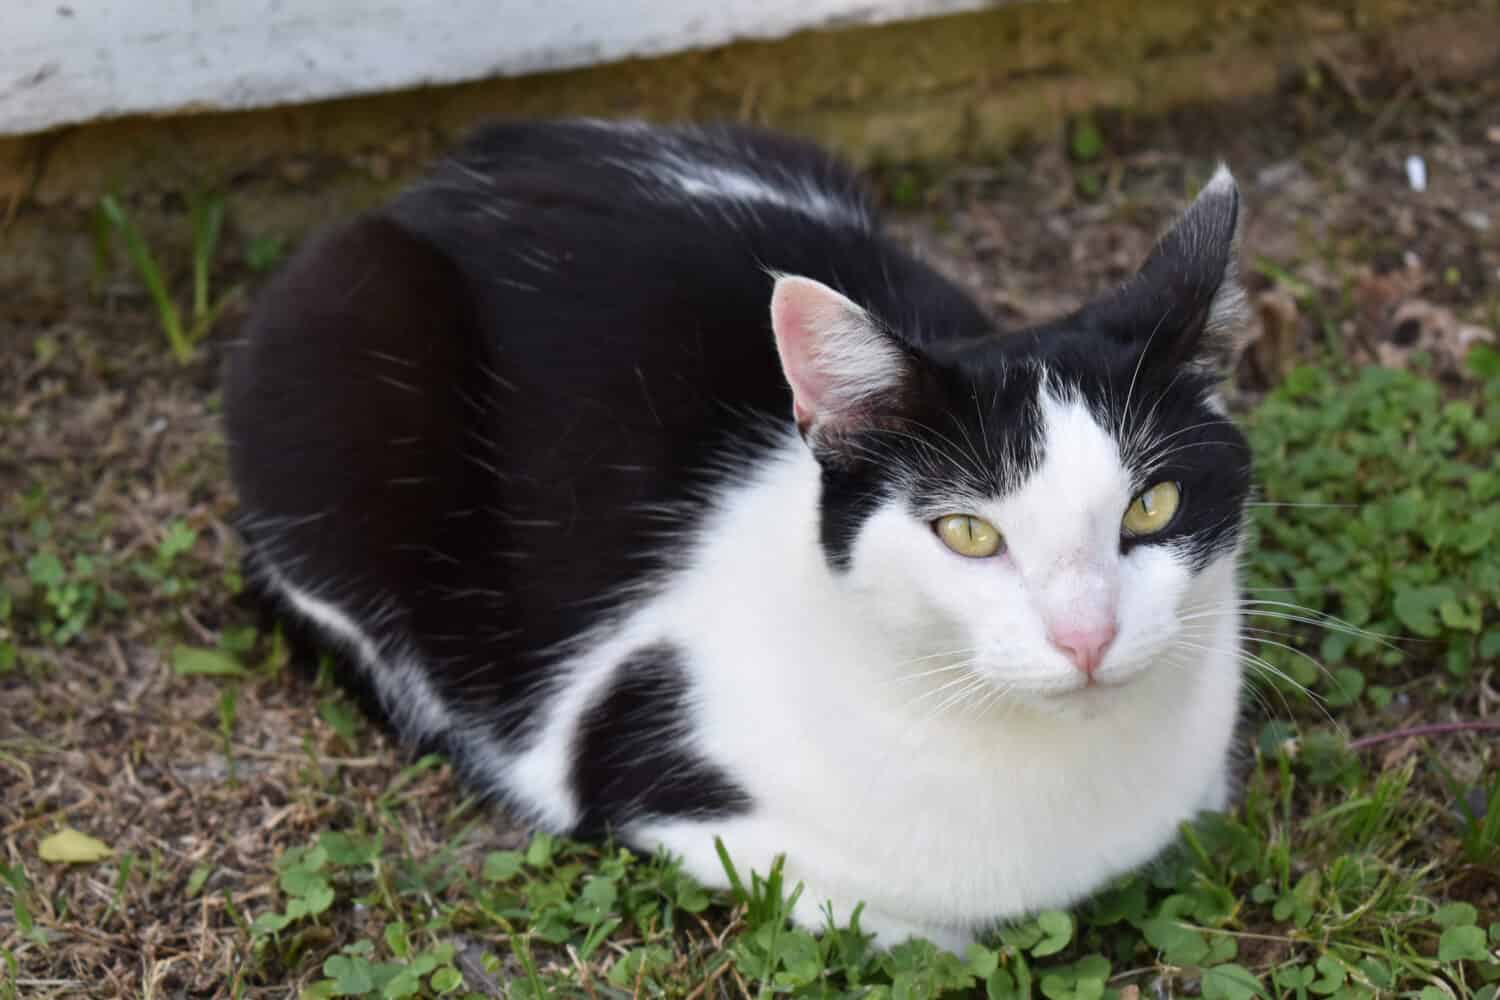 Black and White Cat Sitting in a loaf position outdoors.